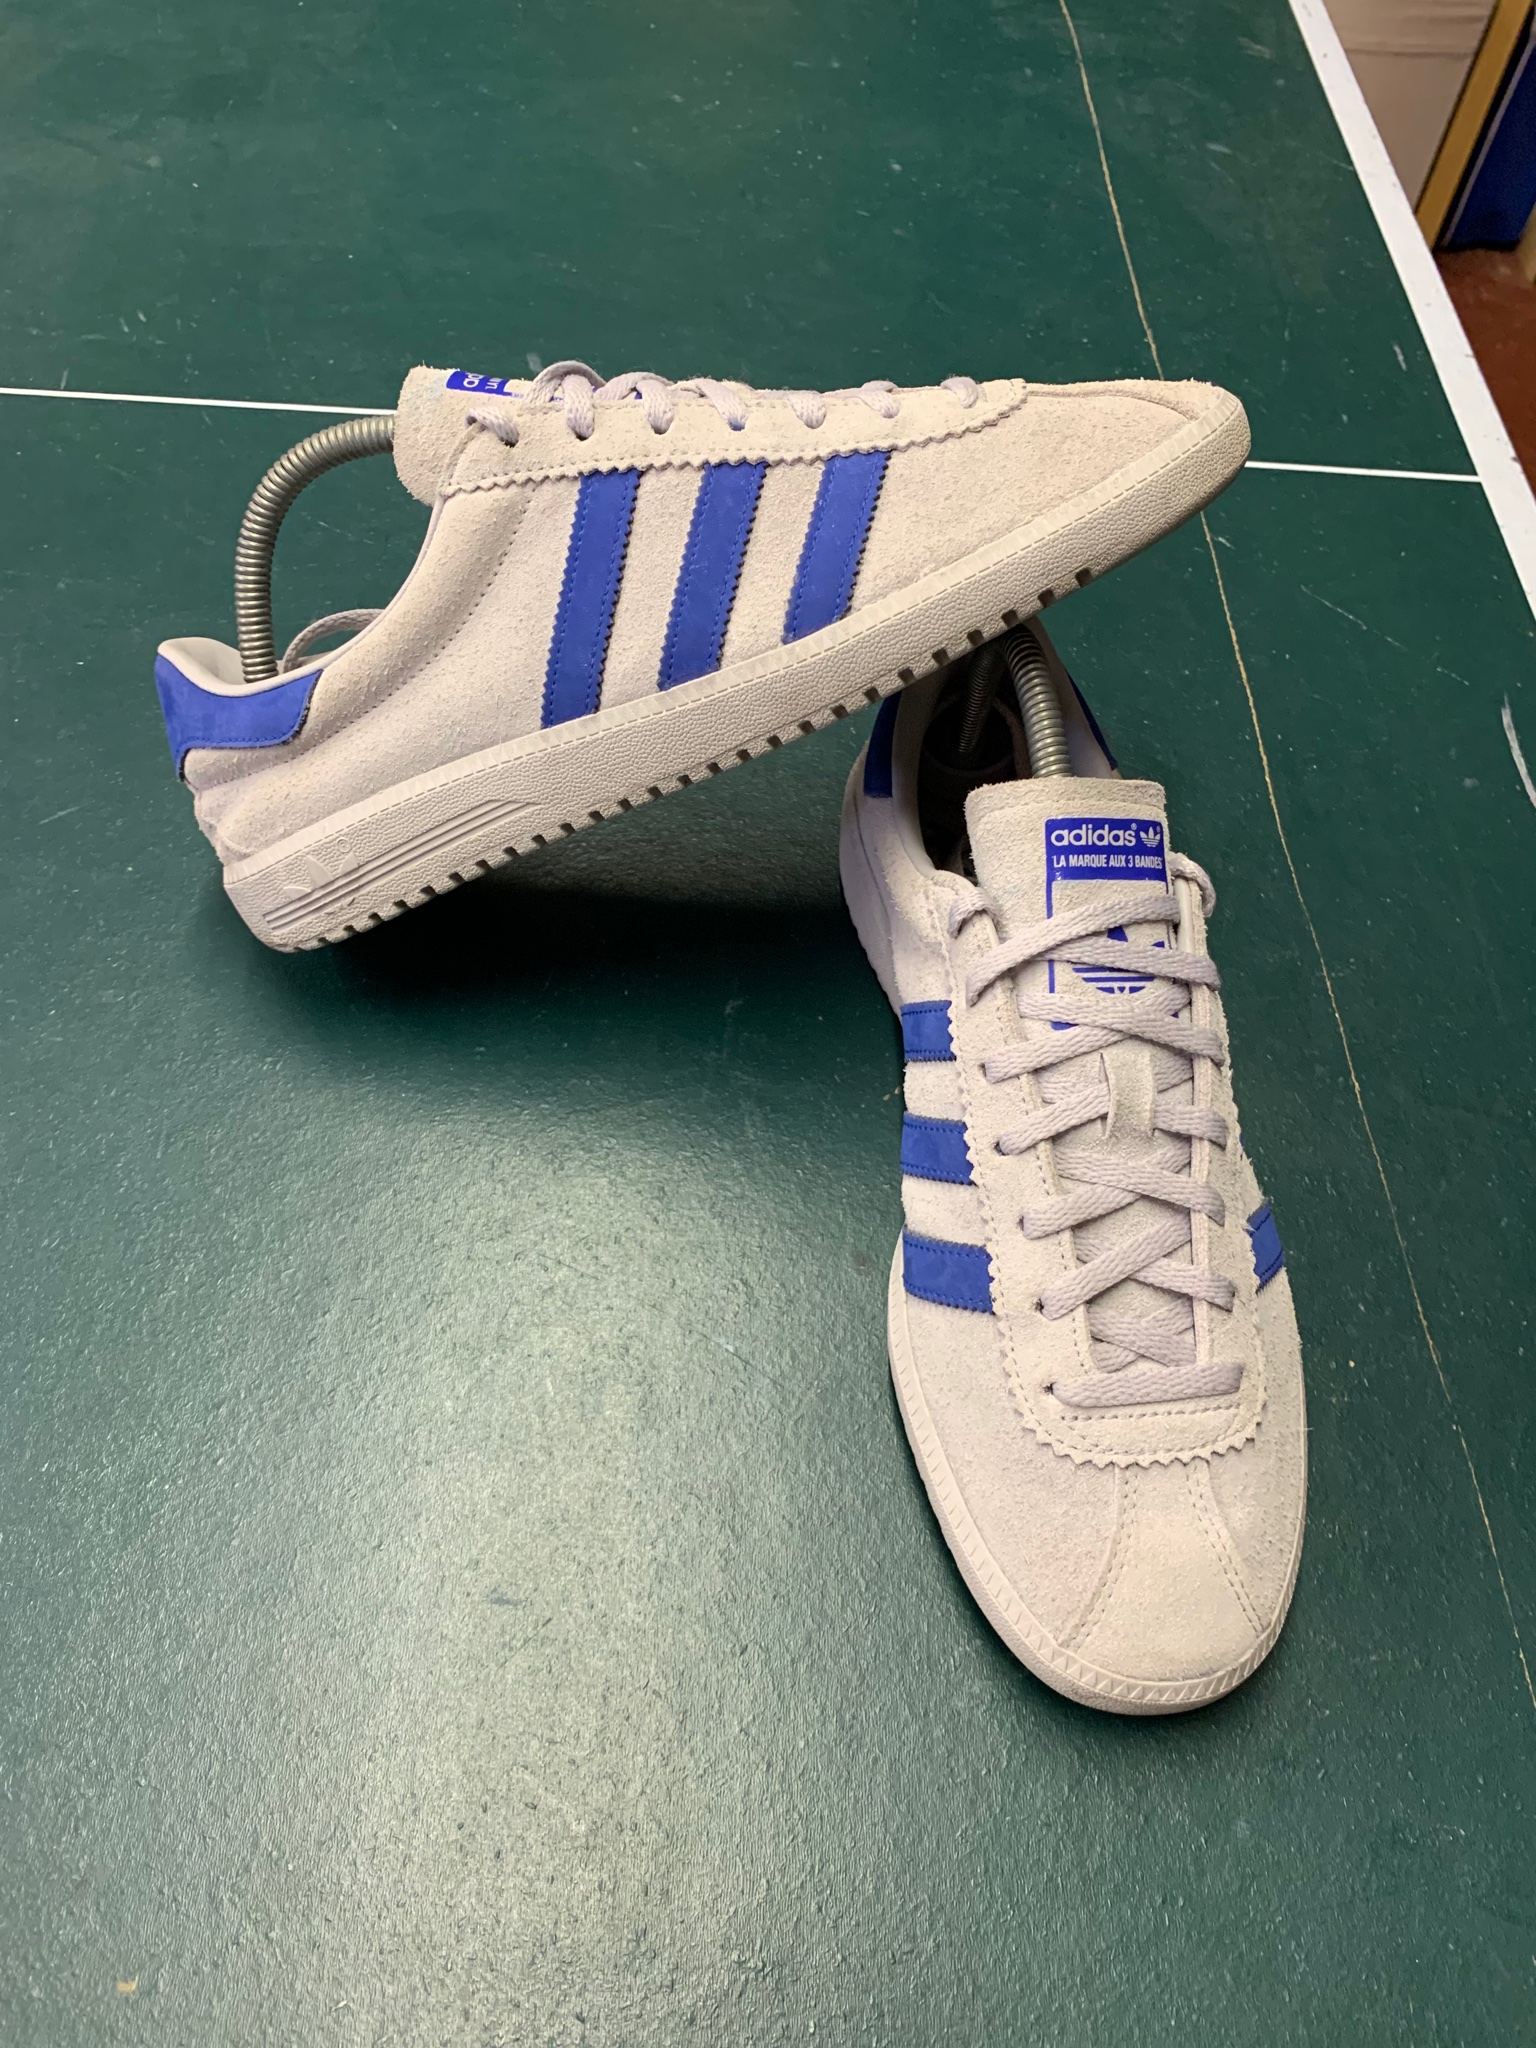 BabaYaga/// on Twitter: "Adidas Bermuda - UK 8 Good condition No box but  will try to source a blue box £42TYD Retweets appreciated DM if interested  https://t.co/eglSF6trok" / Twitter